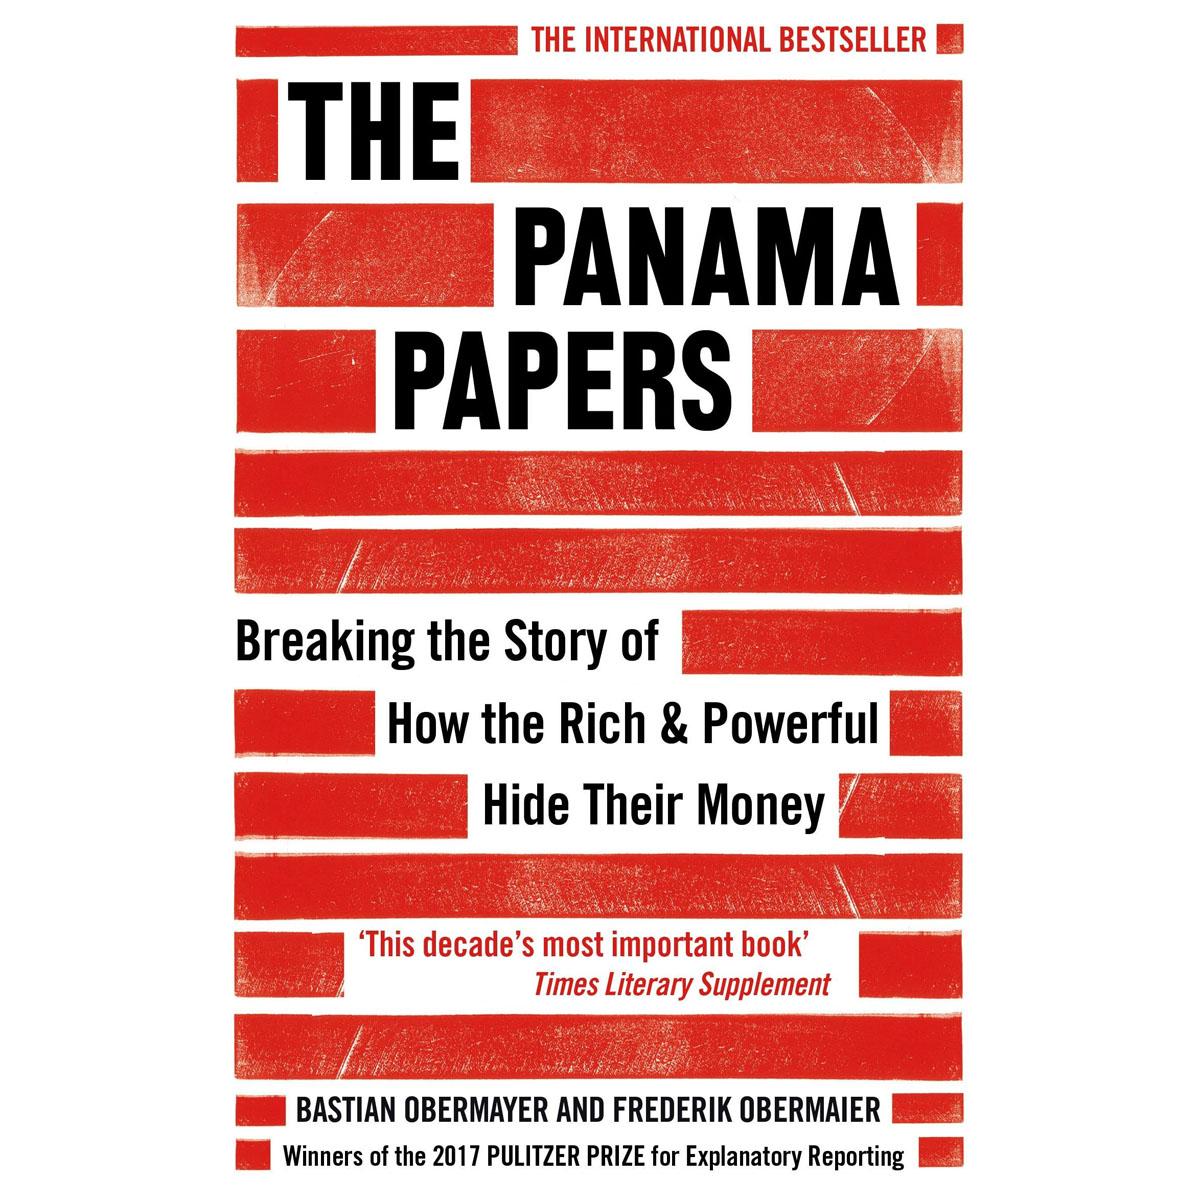 The Panama Papers Breaking the Story of How the Rich Hide Their Money eBook for $0.99